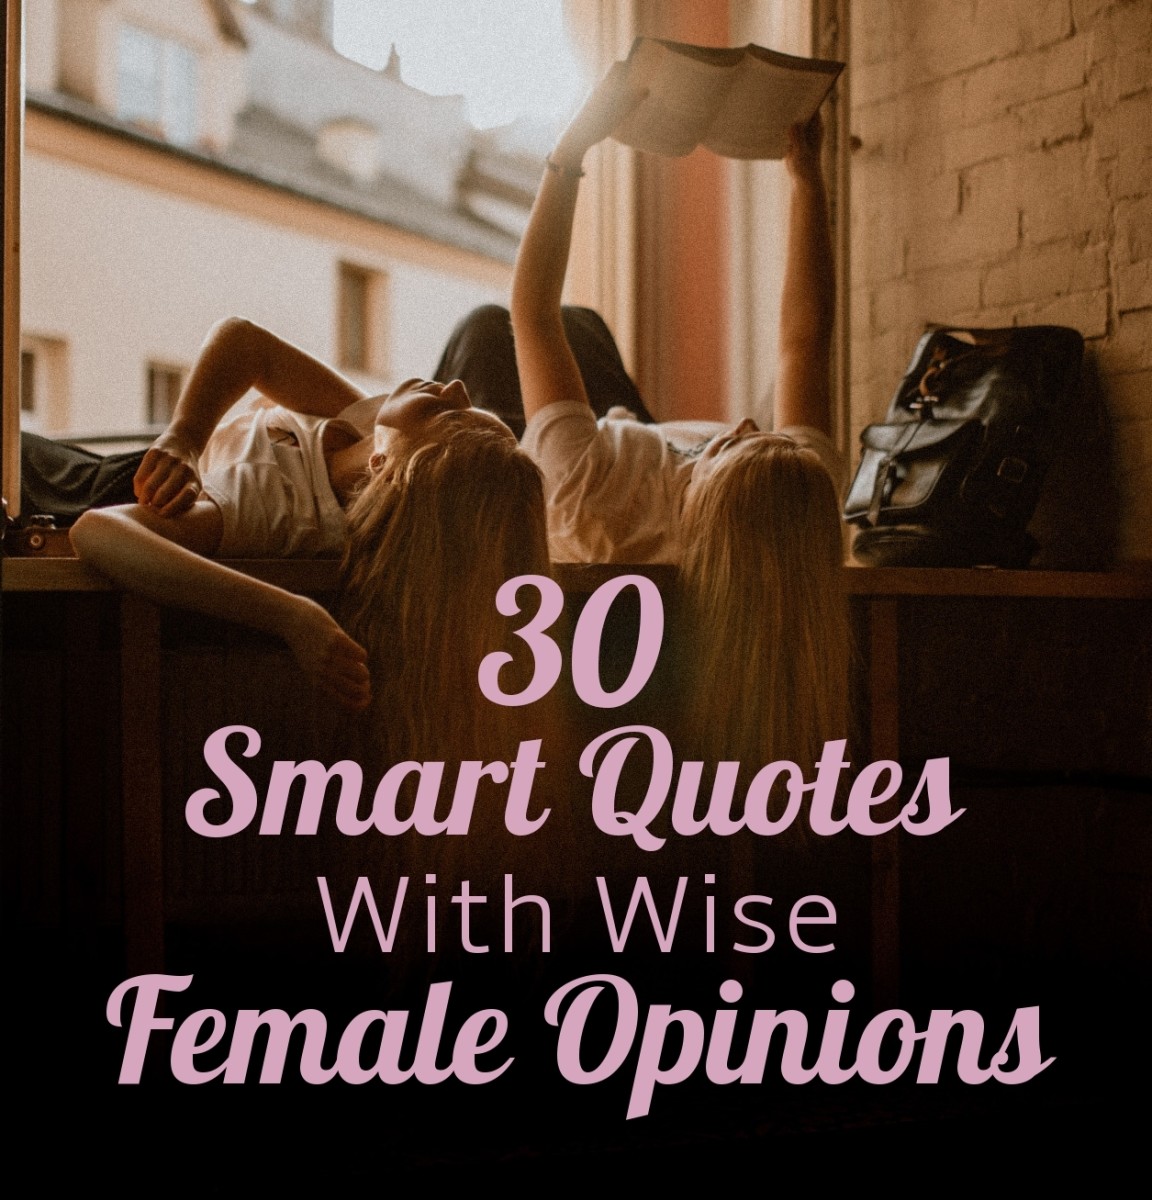 30 Smart Quotes With Wise Female Opinions